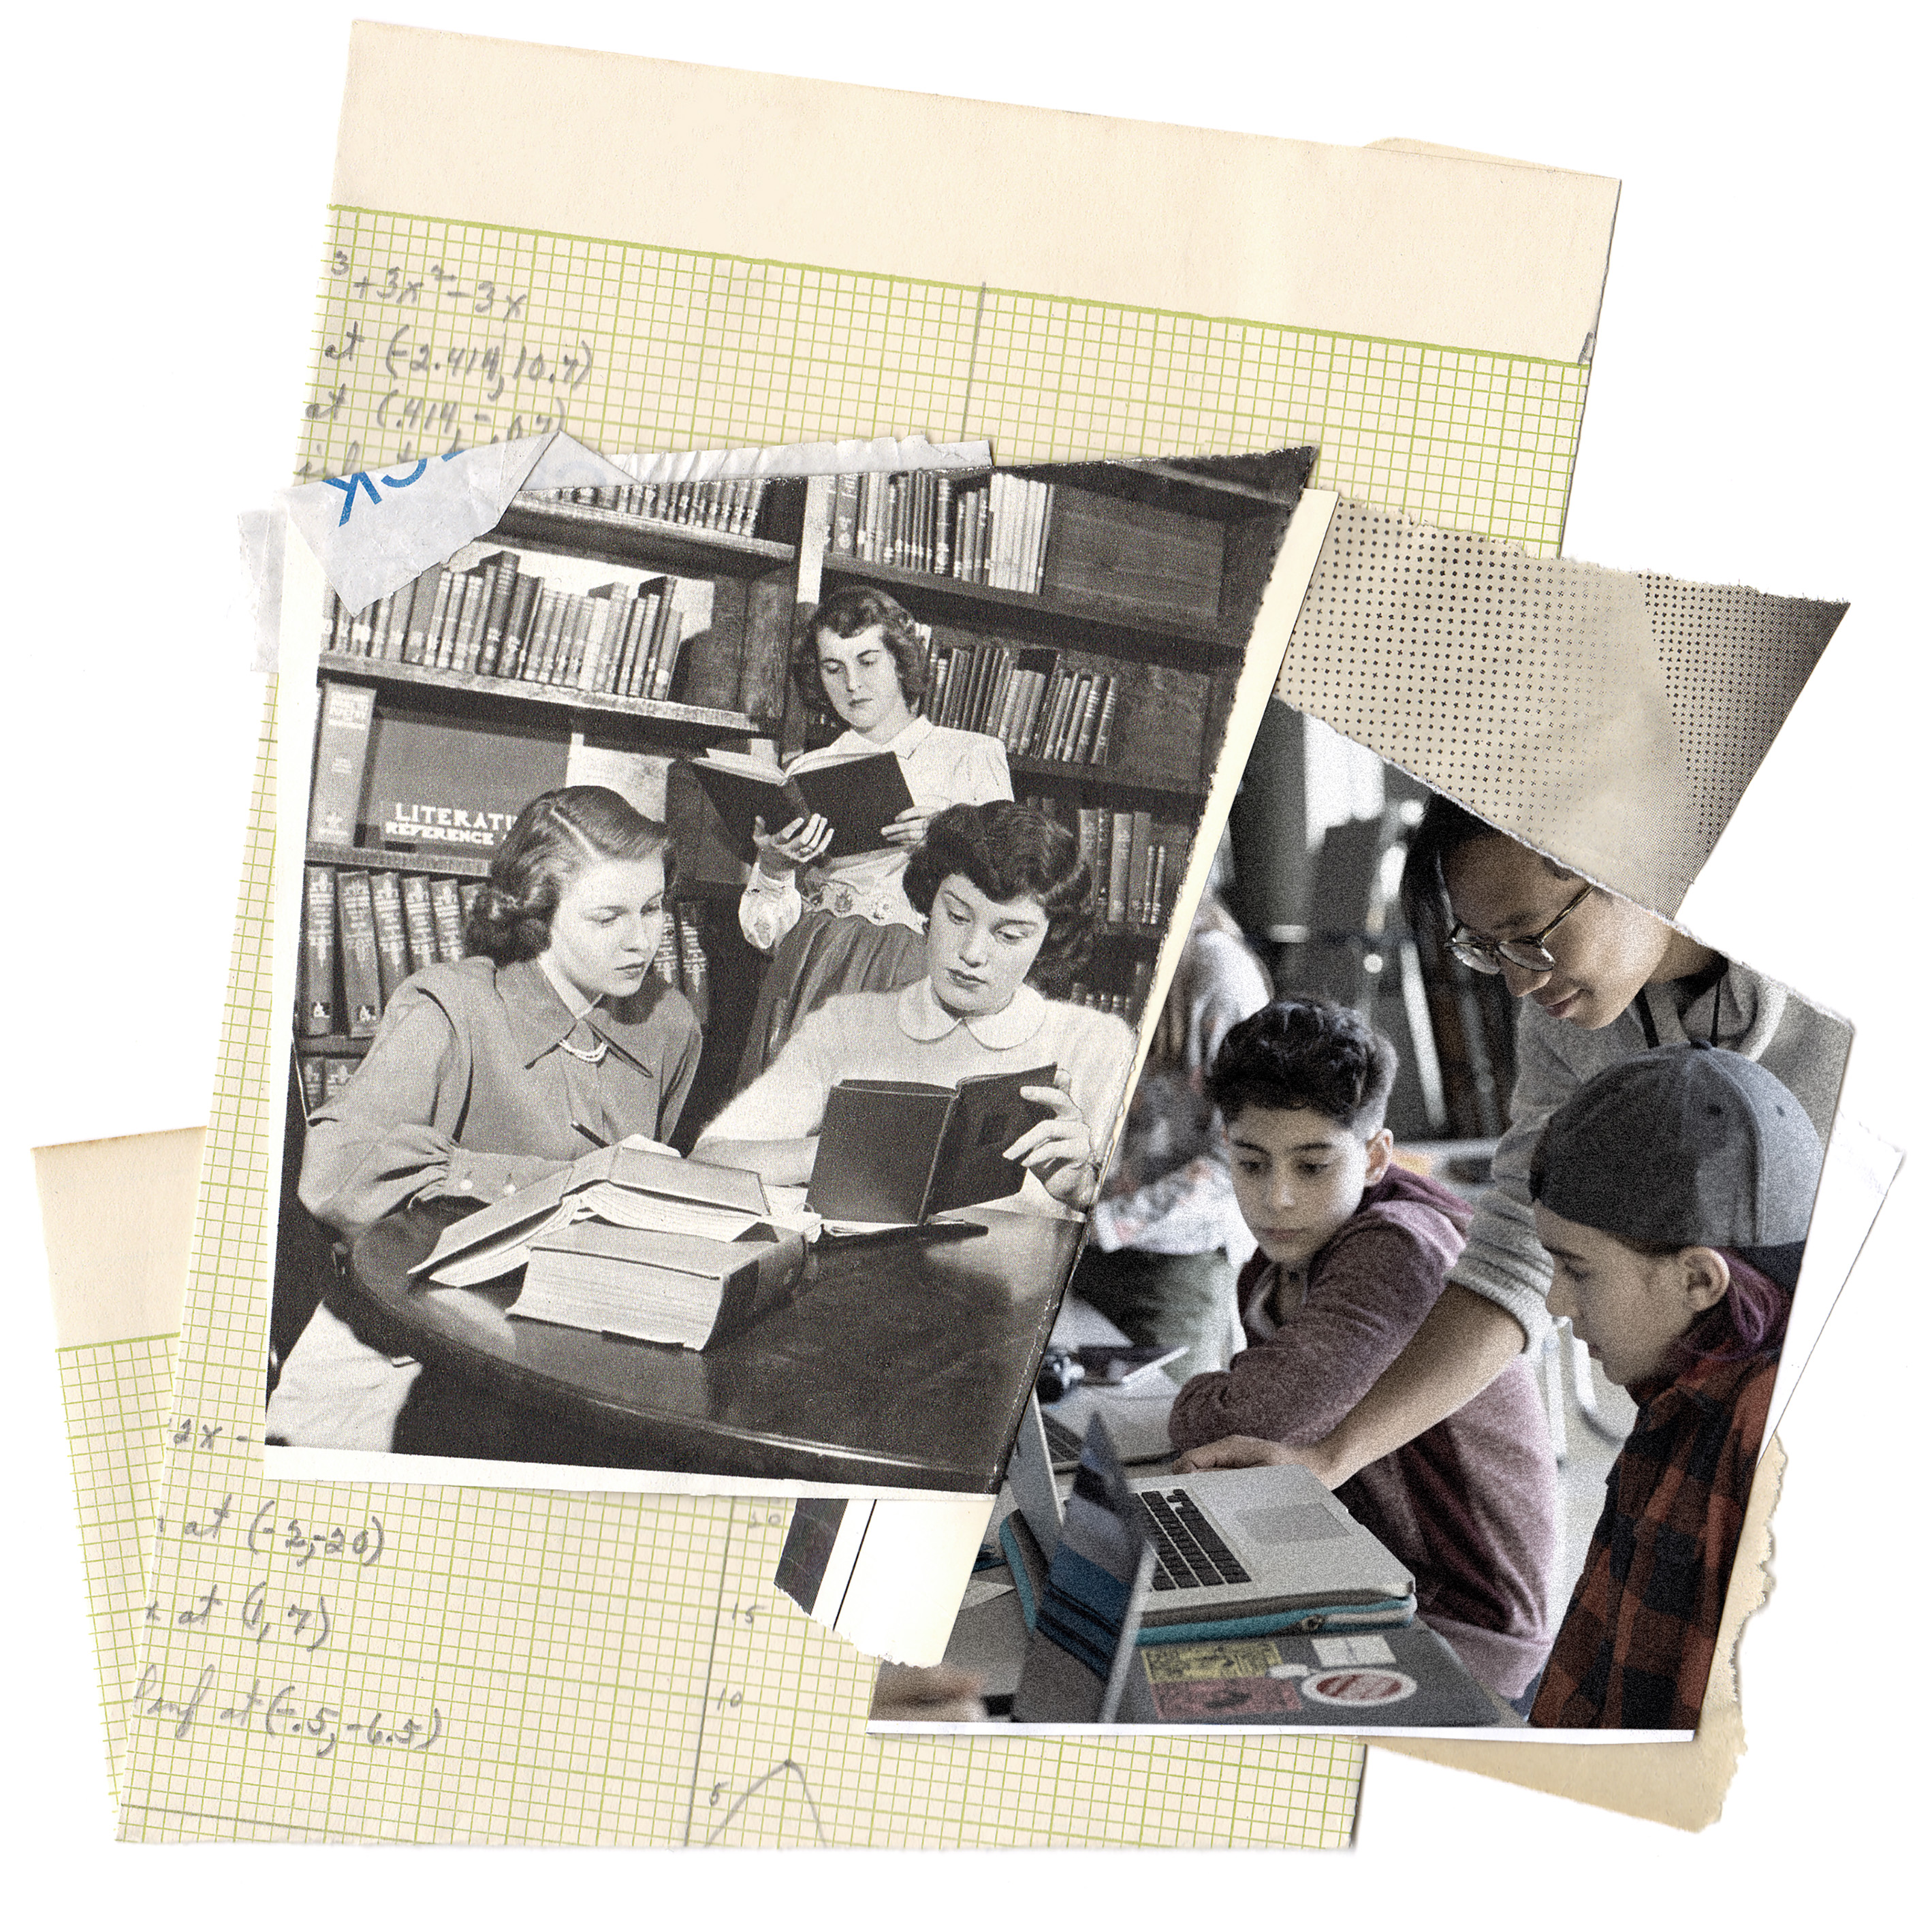 Conceptual collage illustration of old and new education technologies, includes vintage photography.